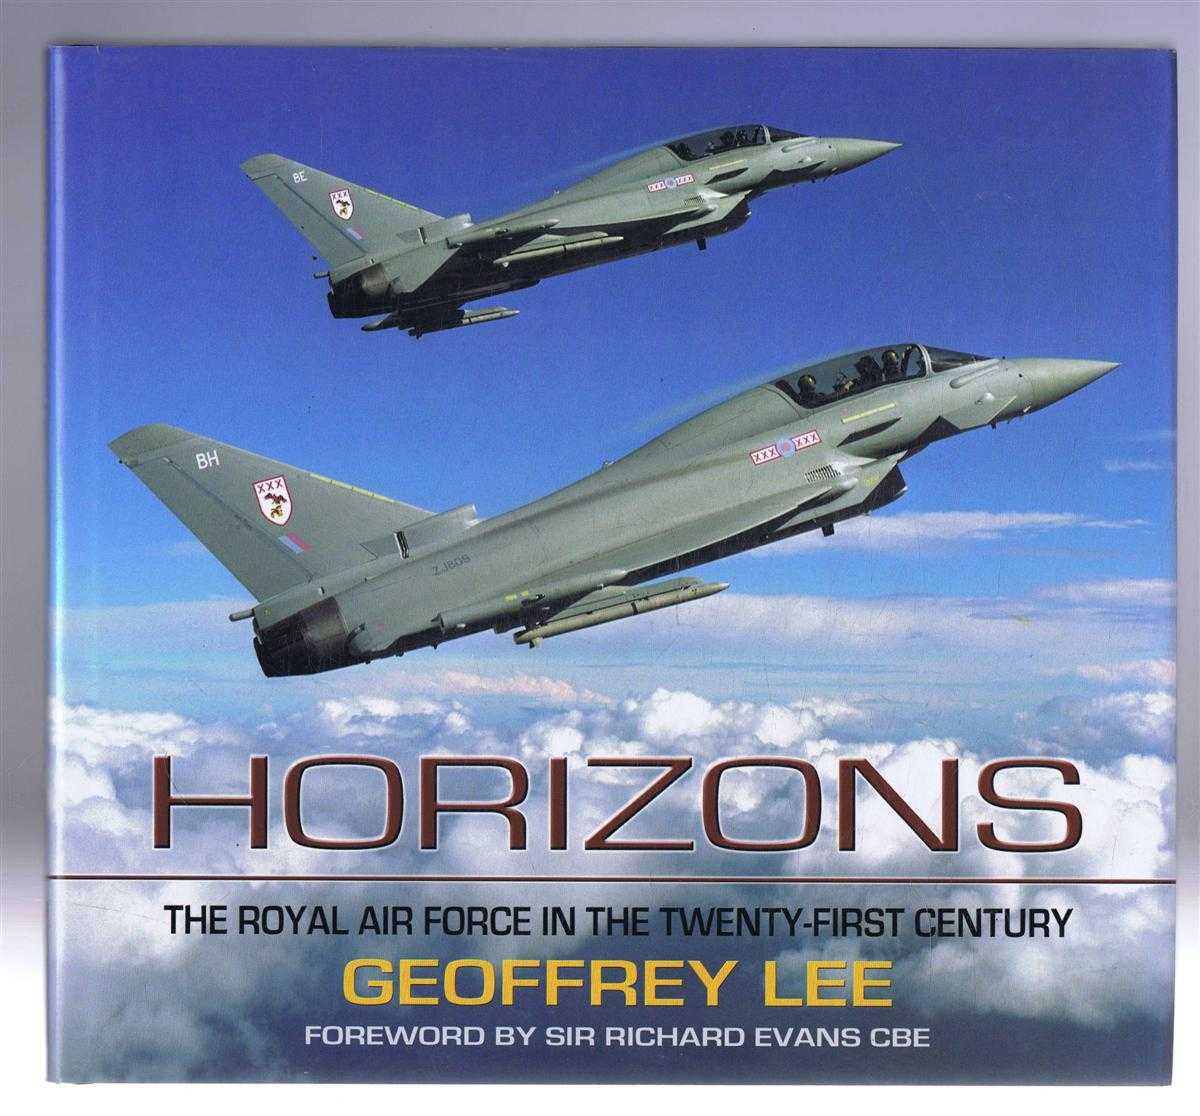 Geoffrey Lee. Foreword by Sir Richard Evans CBE - Horizons: The Royal Air Force in the Twenty-First Century